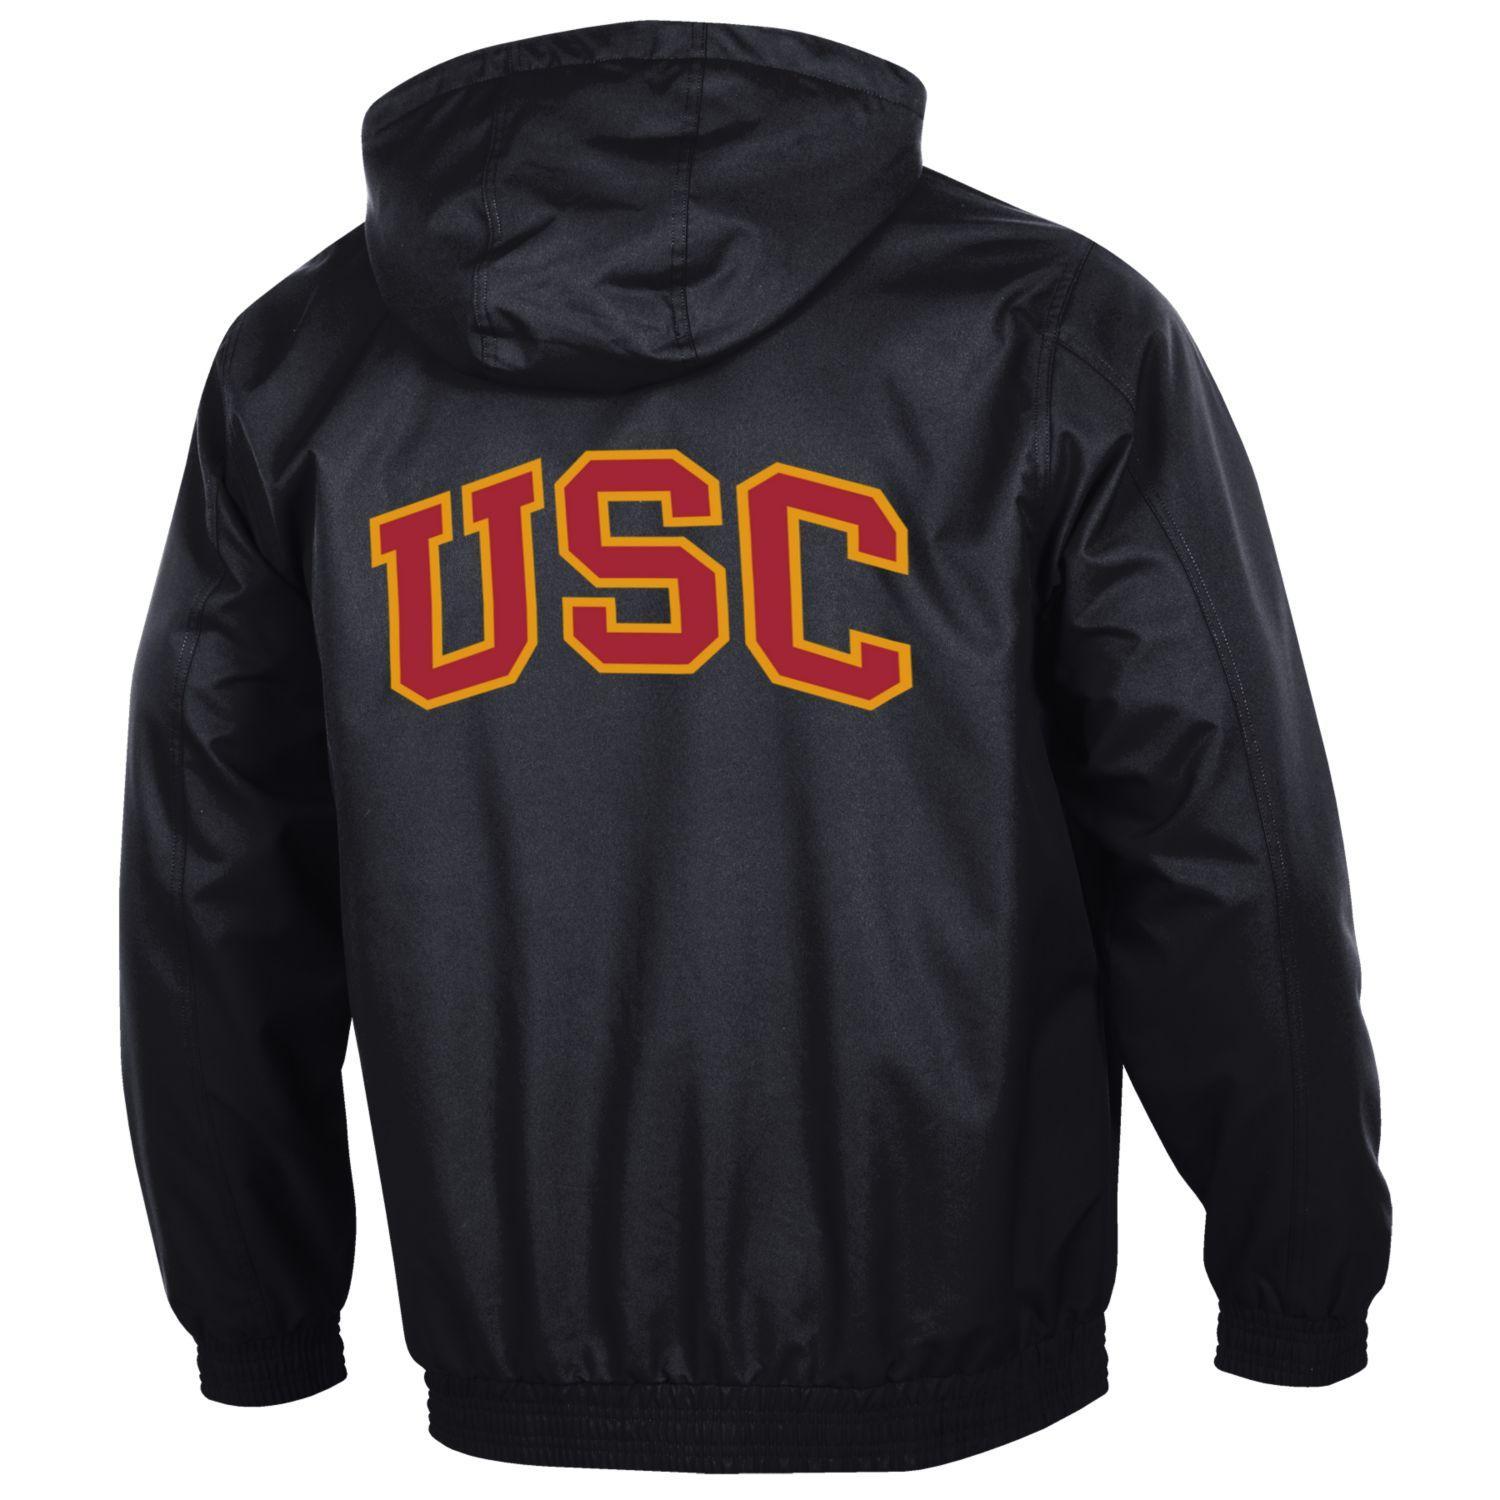 USC Arch Mens Victory Jacket image41